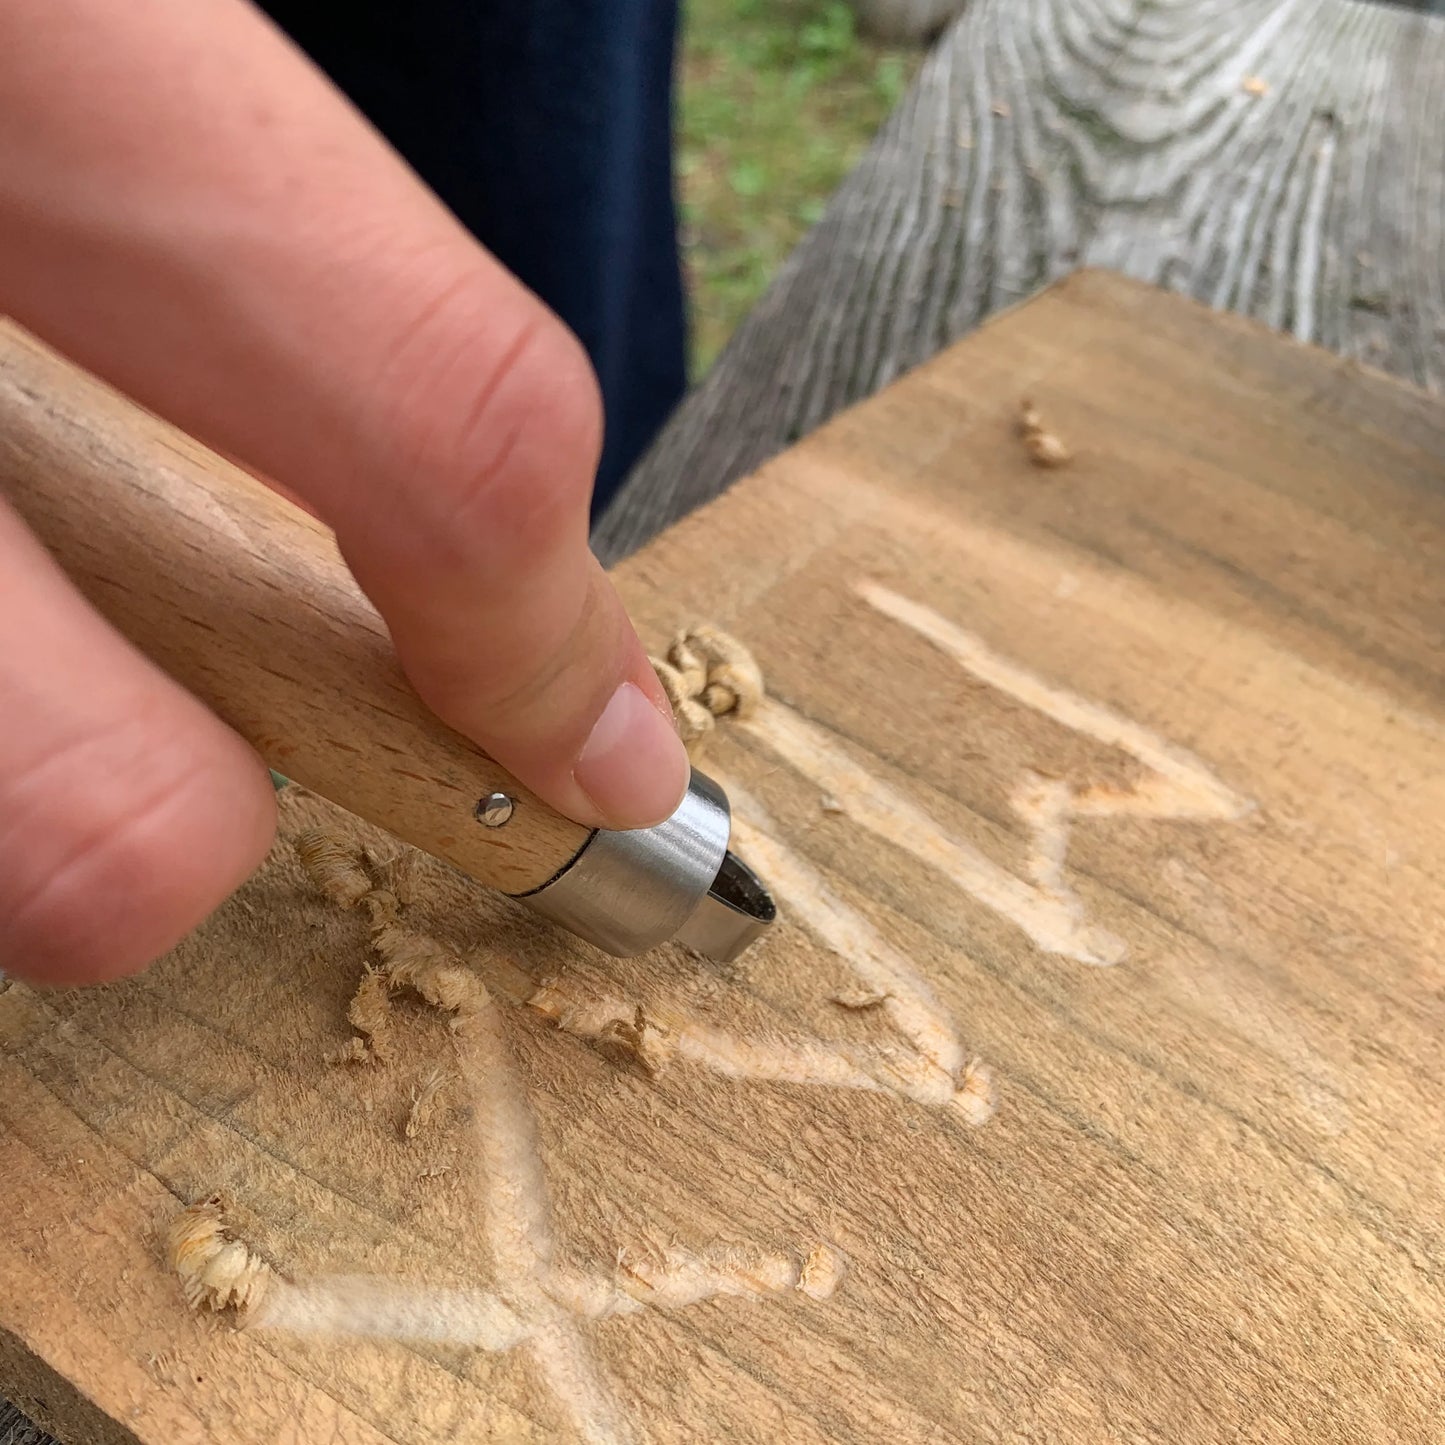 Huckleberry: Wood Carving Tool